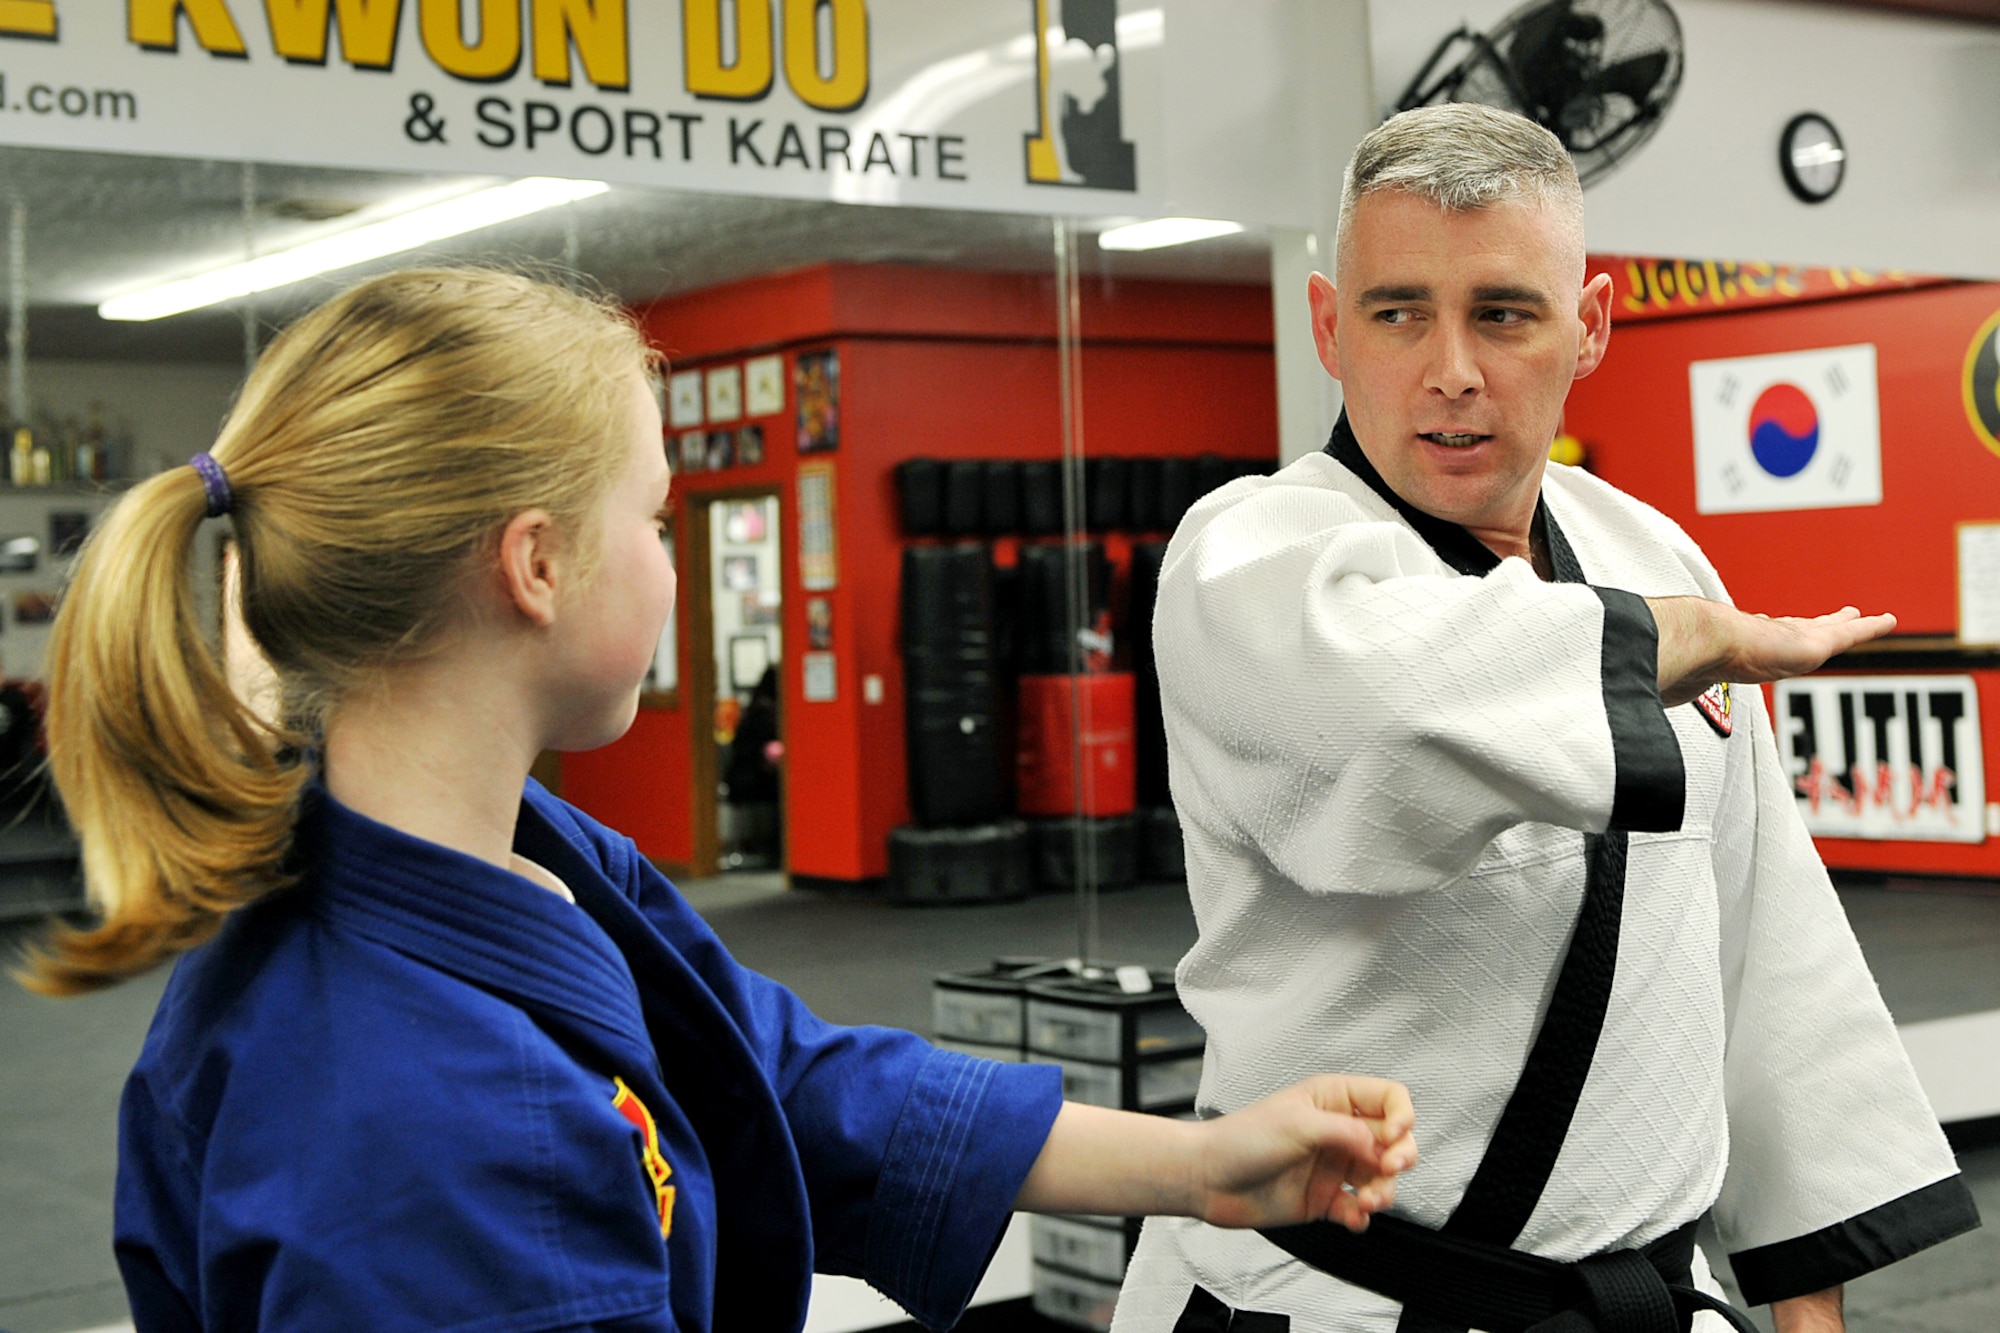 OFFUTT AIR FORCE BASE, Neb. - Abby Wolfe attempts to grab the wrist of Tech. Sgt. Michael Munyon, with the 55th Security Forces Sqaudron, during hapkido class at an Omaha dojang March 12. Sergeant Munyon currently holds a 5th degree black belt in Taekwondo and a 2nd degree black belt in Hapkido, another form of Korean martial arts. He was recently inducted into the Masters Hall of Fame.

U.S. Air Force Photo by Charles Haymond